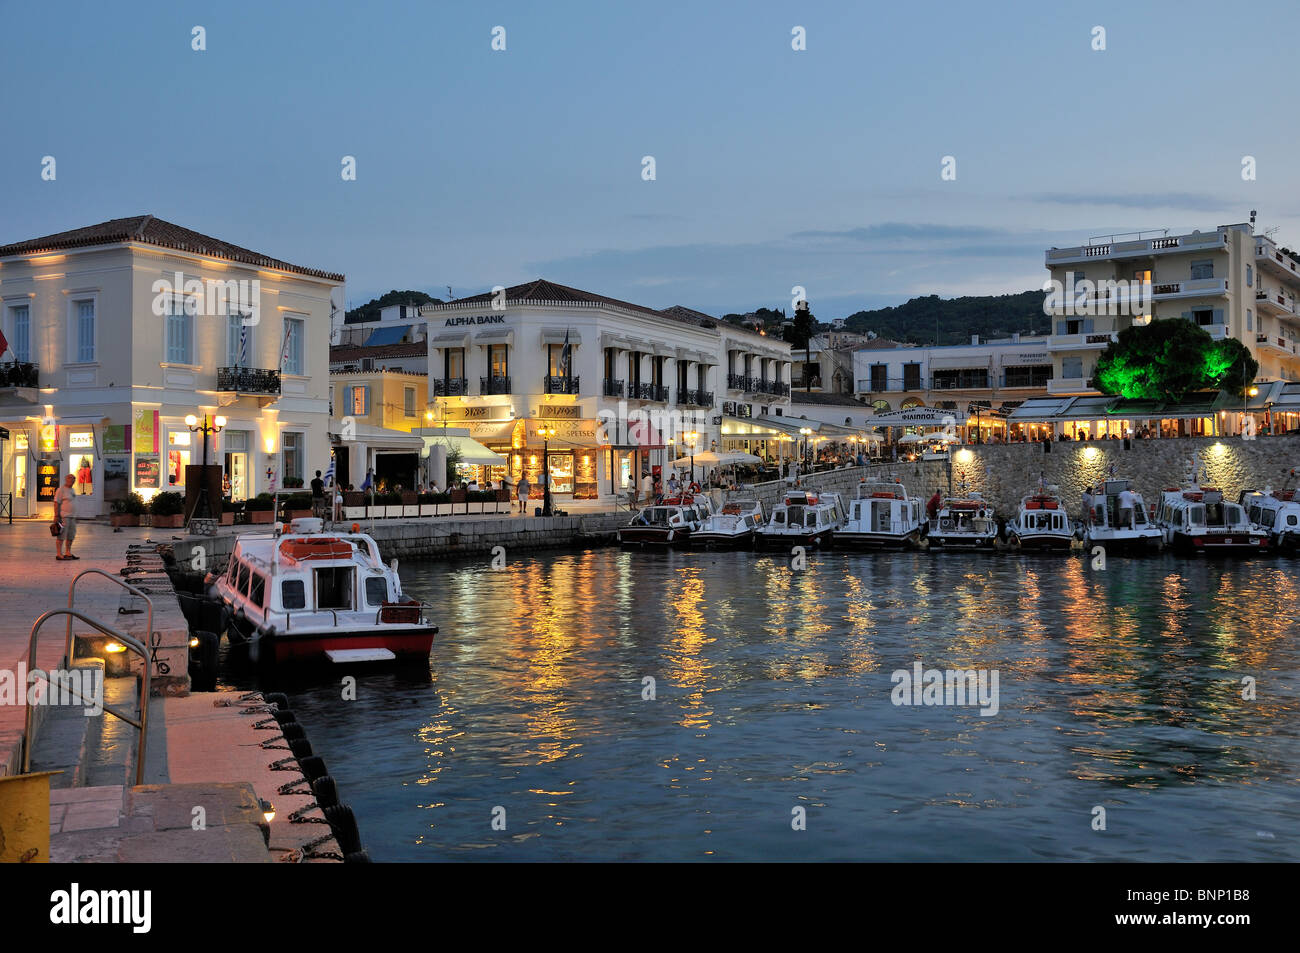 Spetses town during dusk time, Spetses island, Greece Stock Photo